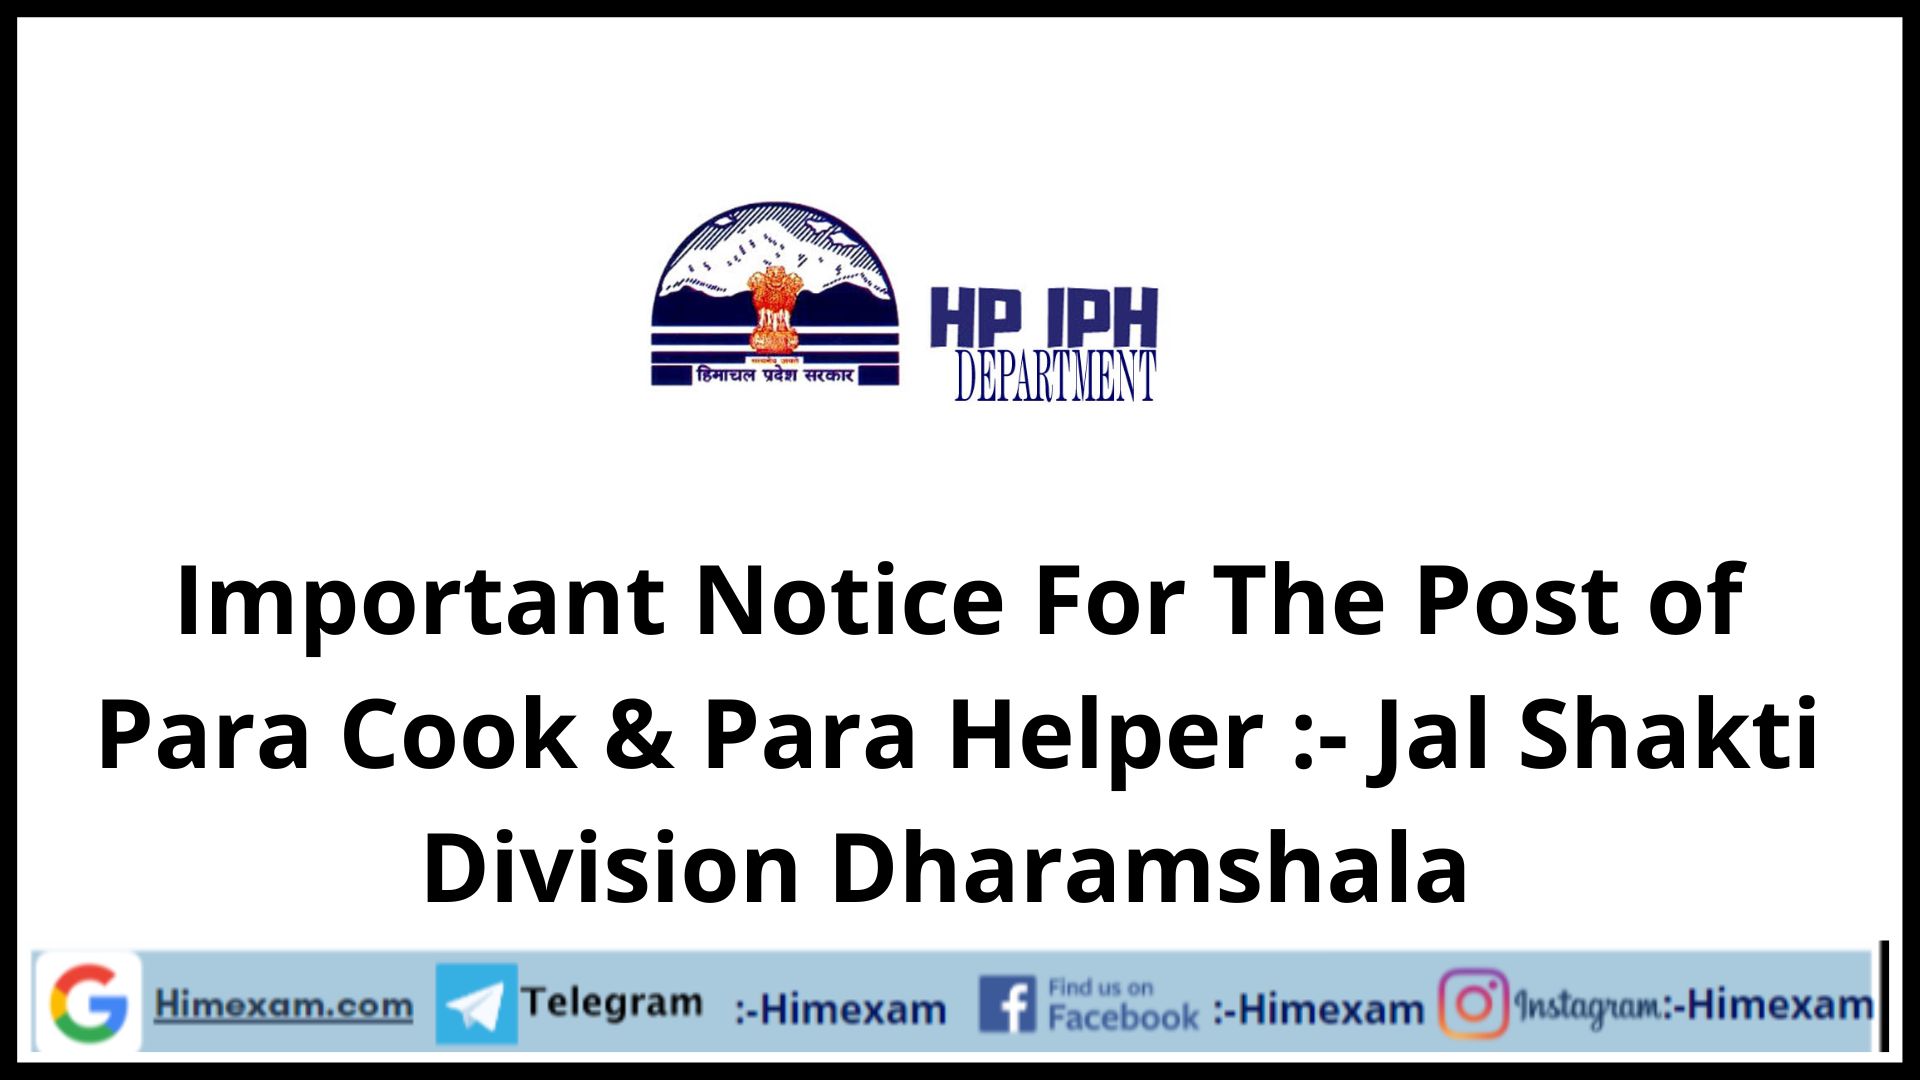 Important Notice For The Post of Para Cook & Para Helper :- Jal Shakti Division Dharamshala